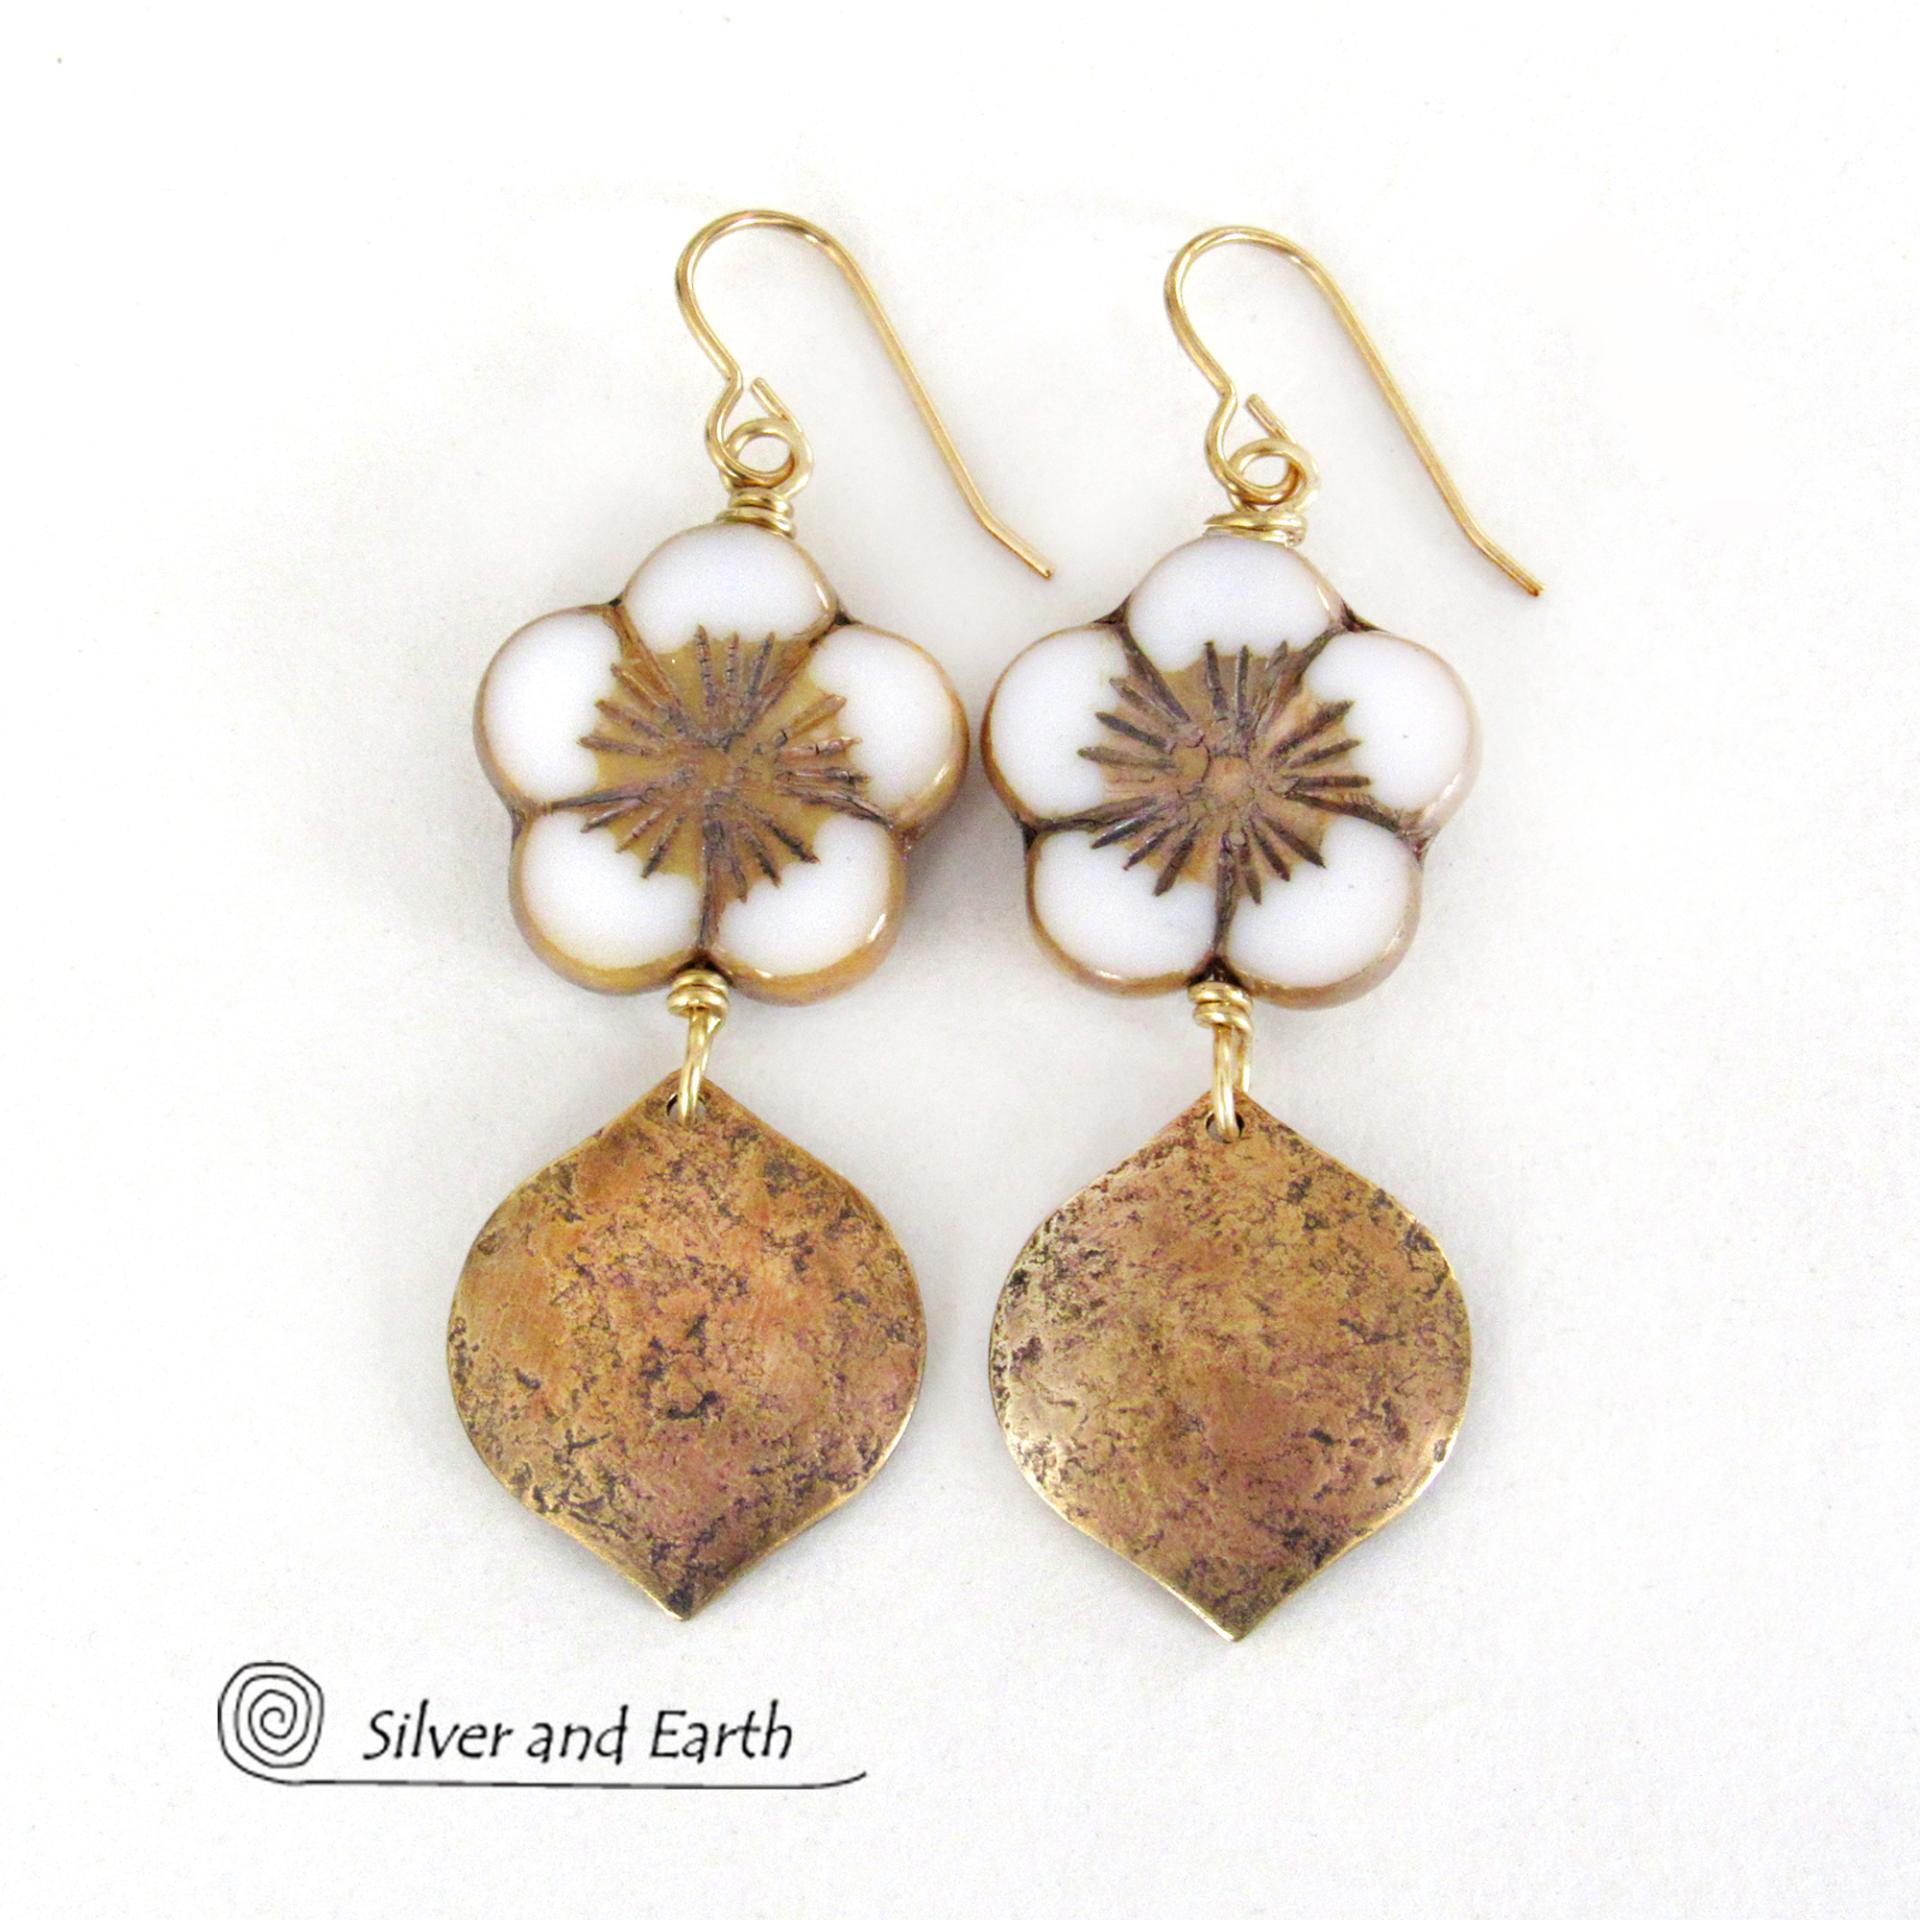 White and Gold Glass Flower Earrings with Gold Brass Dangles - Unique Nature Jewelry Gifts for Women